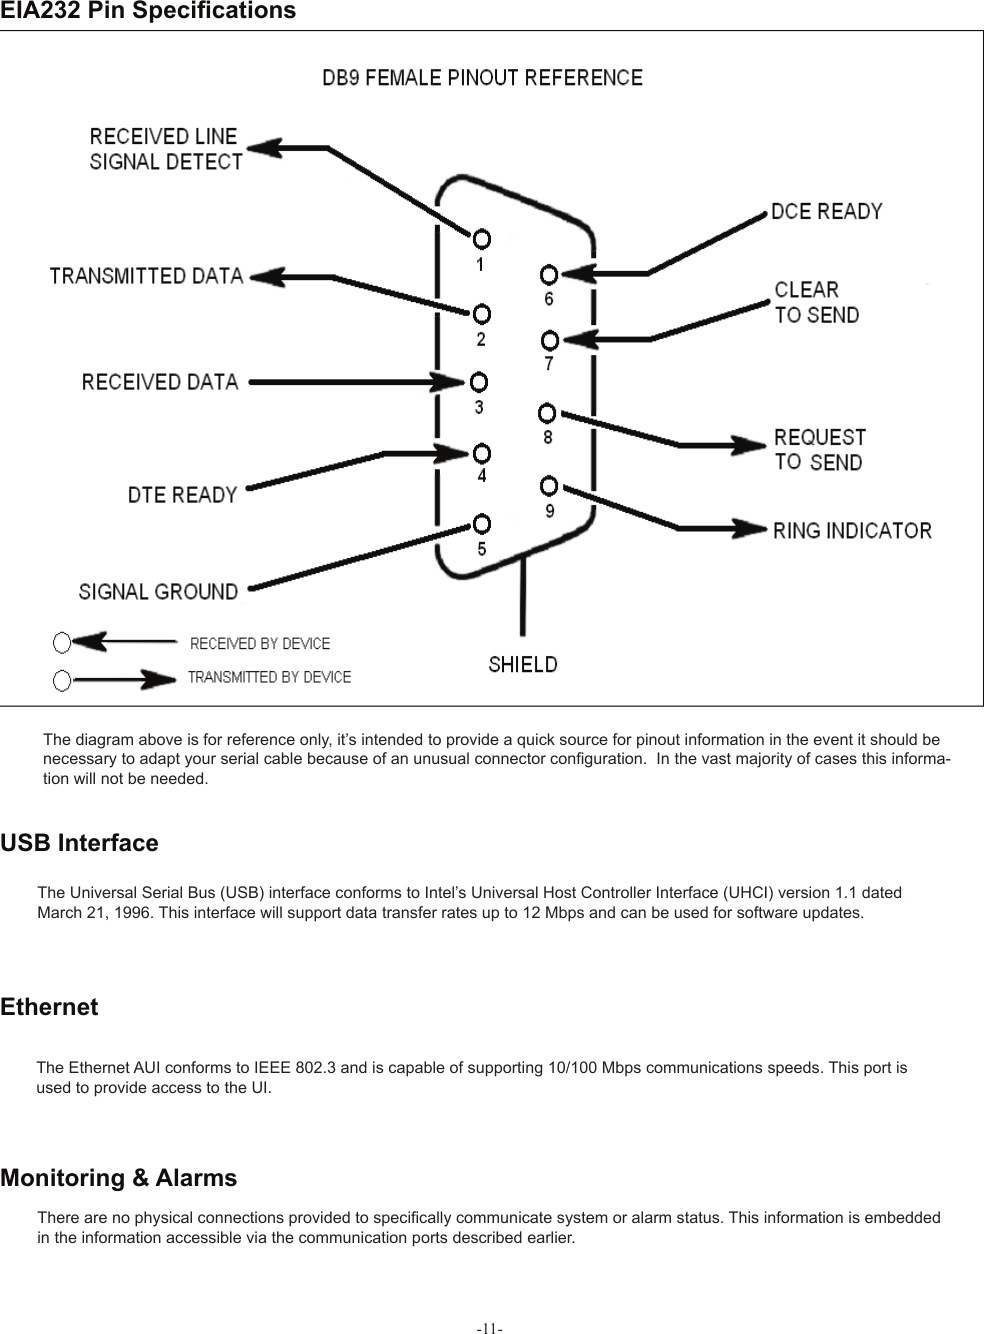 -11- EIA232 Pin Speciﬁ cationsThe diagram above is for reference only, it’s intended to provide a quick source for pinout information in the event it should be necessary to adapt your serial cable because of an unusual connector con• guration.  In the vast majority of cases this informa-tion will not be needed.There are no physical connections provided to speci• cally communicate system or alarm status. This information is embedded in the information accessible via the communication ports described earlier.The Universal Serial Bus (USB) interface conforms to Intel’s Universal Host Controller Interface (UHCI) version 1.1 dated March 21, 1996. This interface will support data transfer rates up to 12 Mbps and can be used for software updates.The Ethernet AUI conforms to IEEE 802.3 and is capable of supporting 10/100 Mbps communications speeds. This port is used to provide access to the UI. USB InterfaceEthernet   Monitoring &amp; Alarms